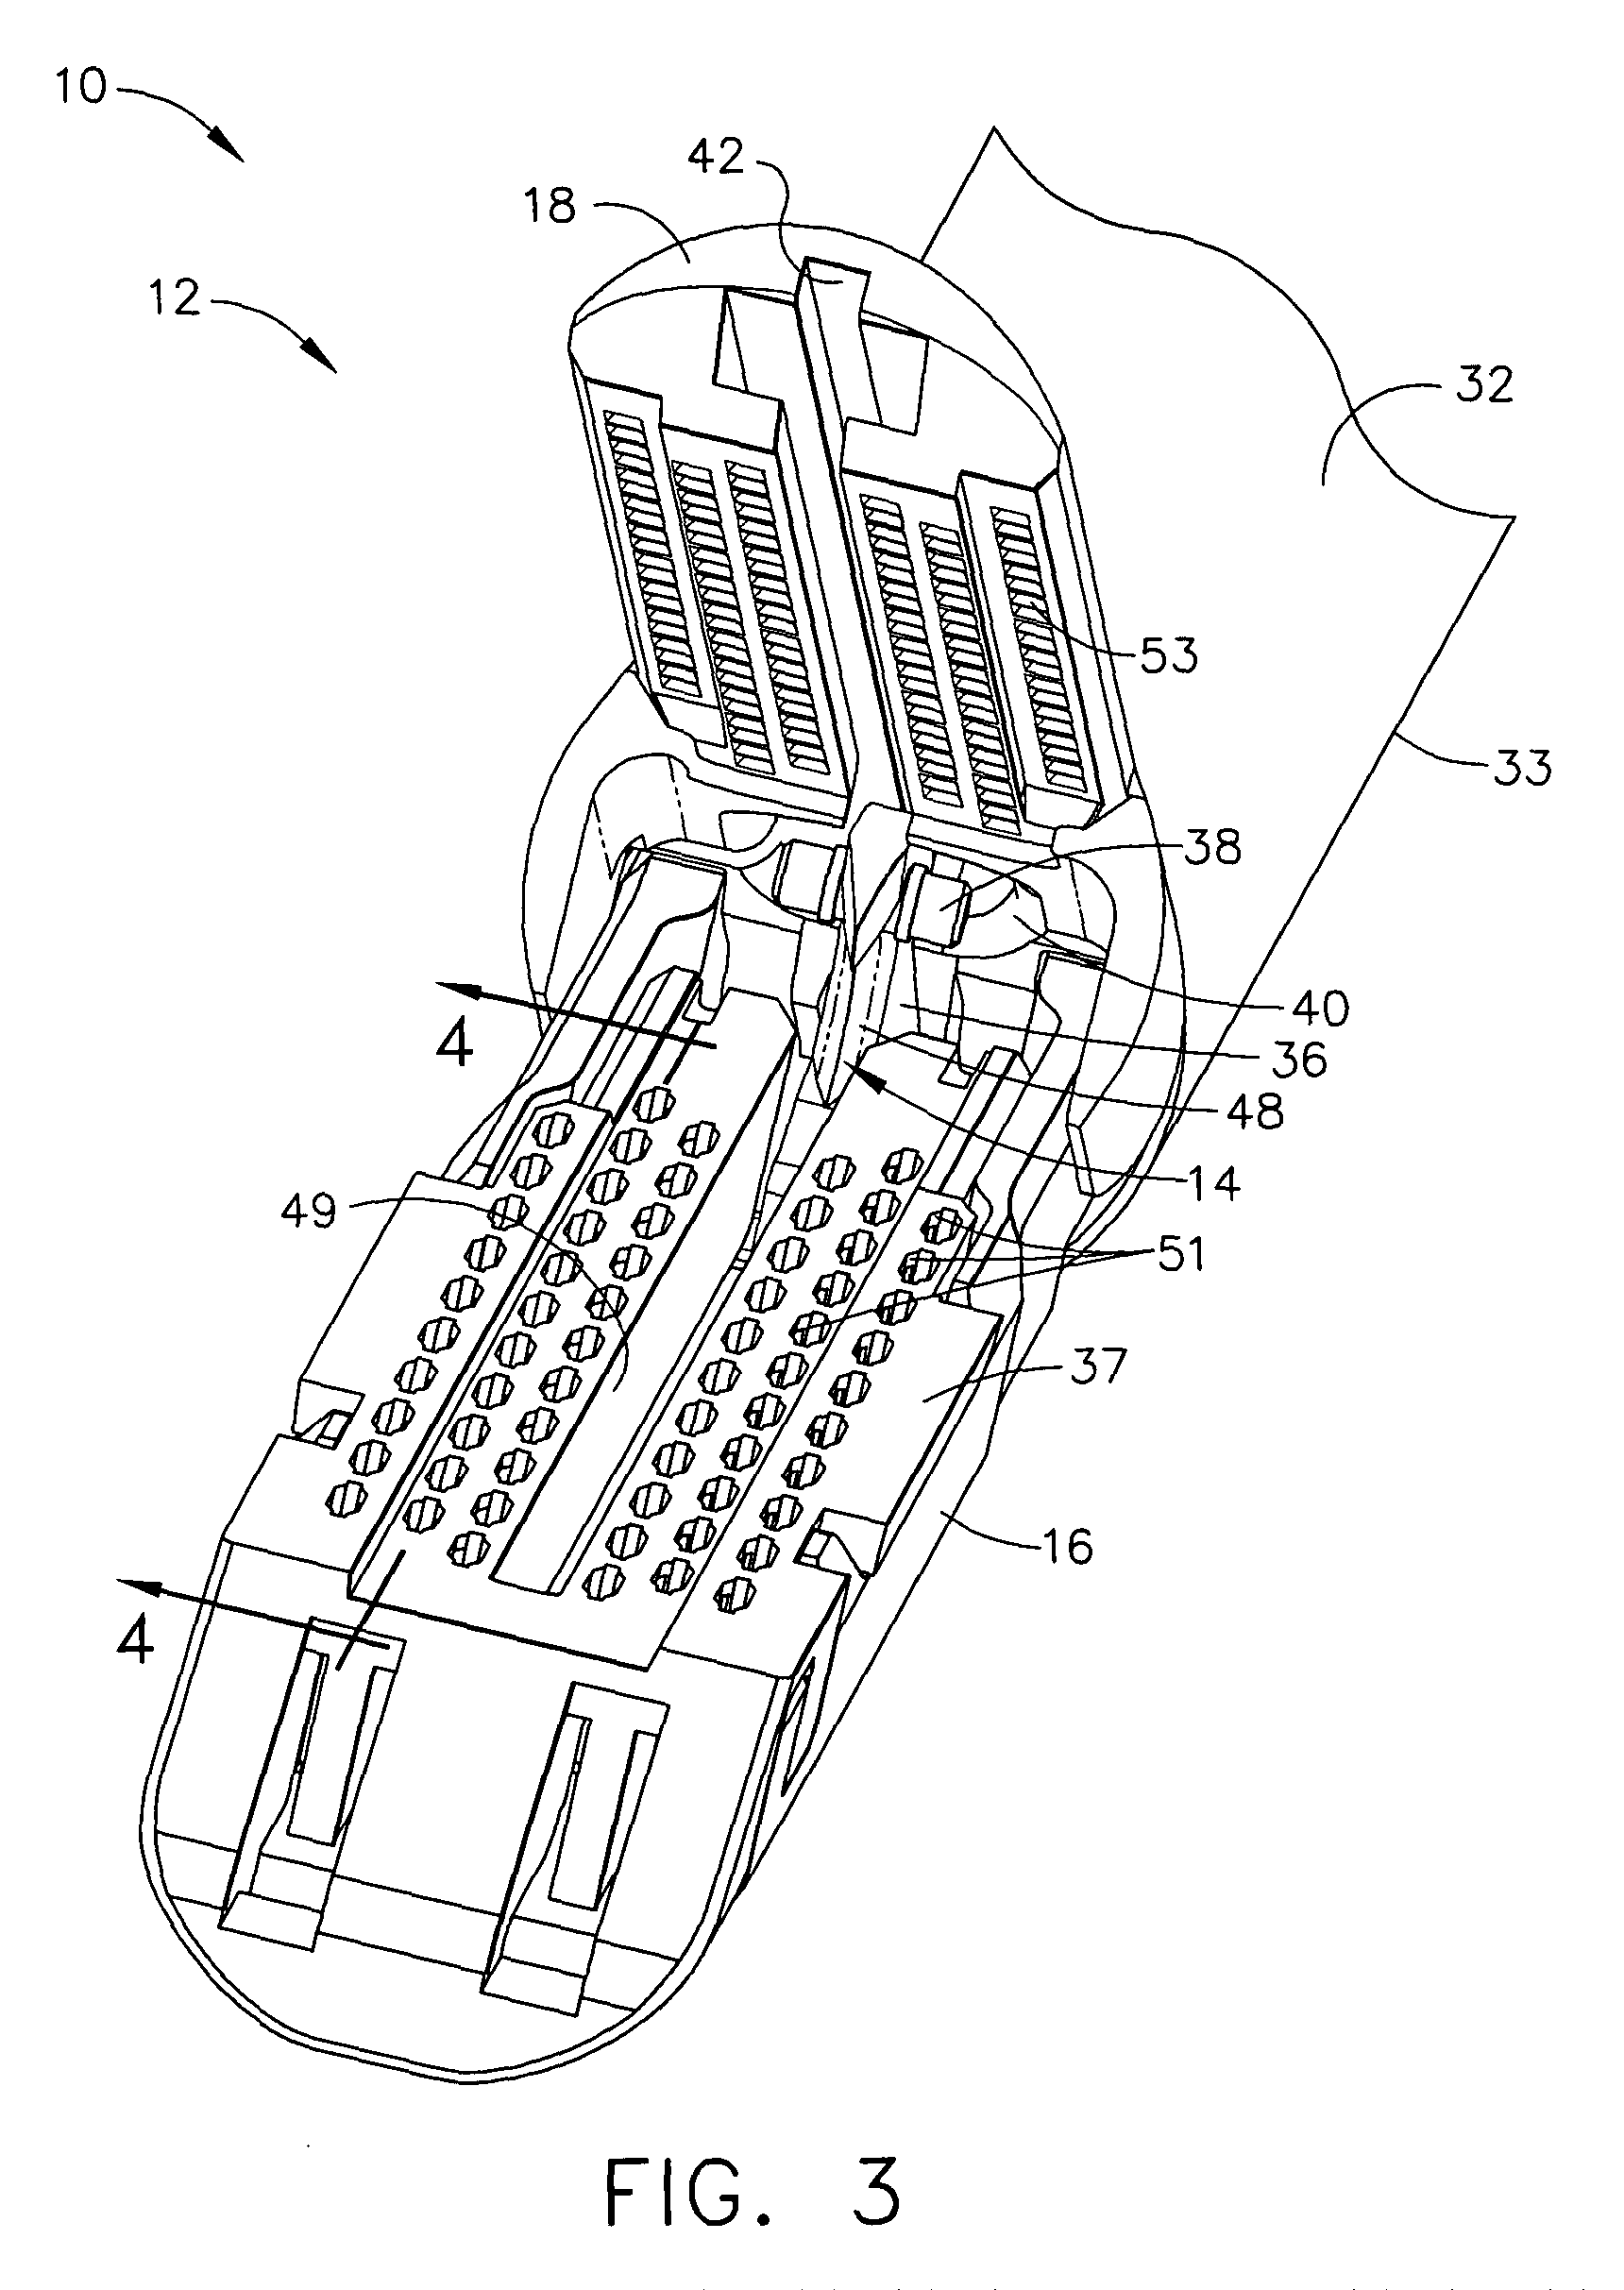 Surgical instrument incorporating an articulation mechanism having rotation about the longitudinal axis